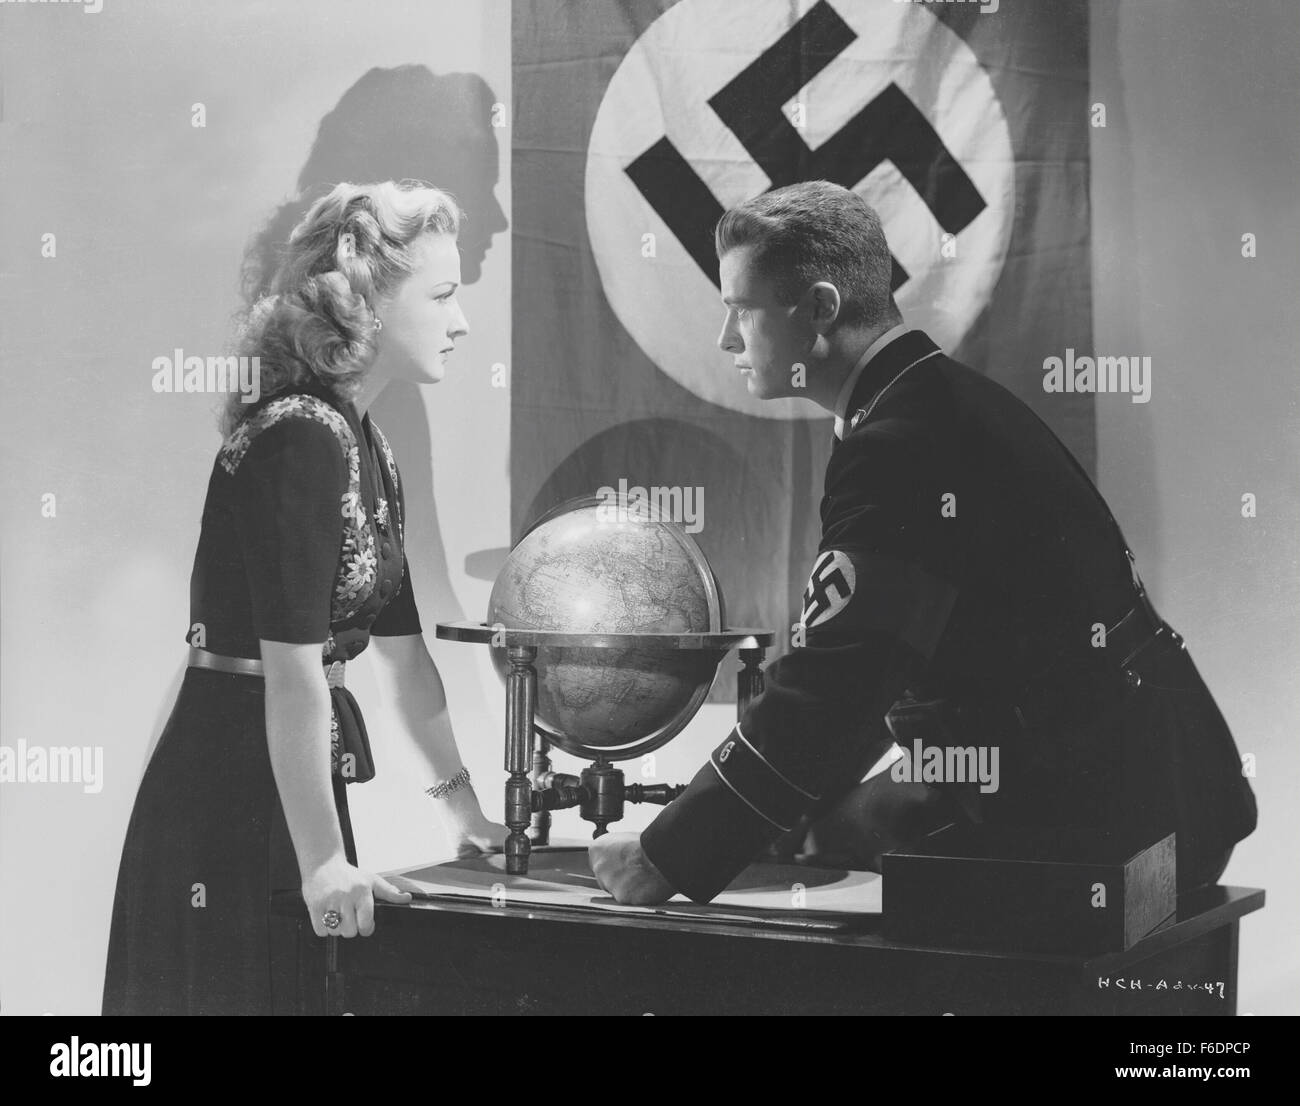 RELEASE DATE: January 6, 1943. MOVIE TITLE: Hitler's Children. STUDIO: RKO Radio Pictures. PLOT: This propaganda piece starts in 1933. Prof. Nichols' American school in Berlin is next door to a school for the Hitler Youth. Karl, from the latter, is attracted to German-American Anna, but events lead to their separation. Later, at the outbreak of war in Europe, Anna is removed from Nichols' school on presumption of German citizenship. Nichols becomes obsessed with finding her, as Anna undergoes a rather lurid odyssey through the Nazi nightmare. PICTURED: . Stock Photo